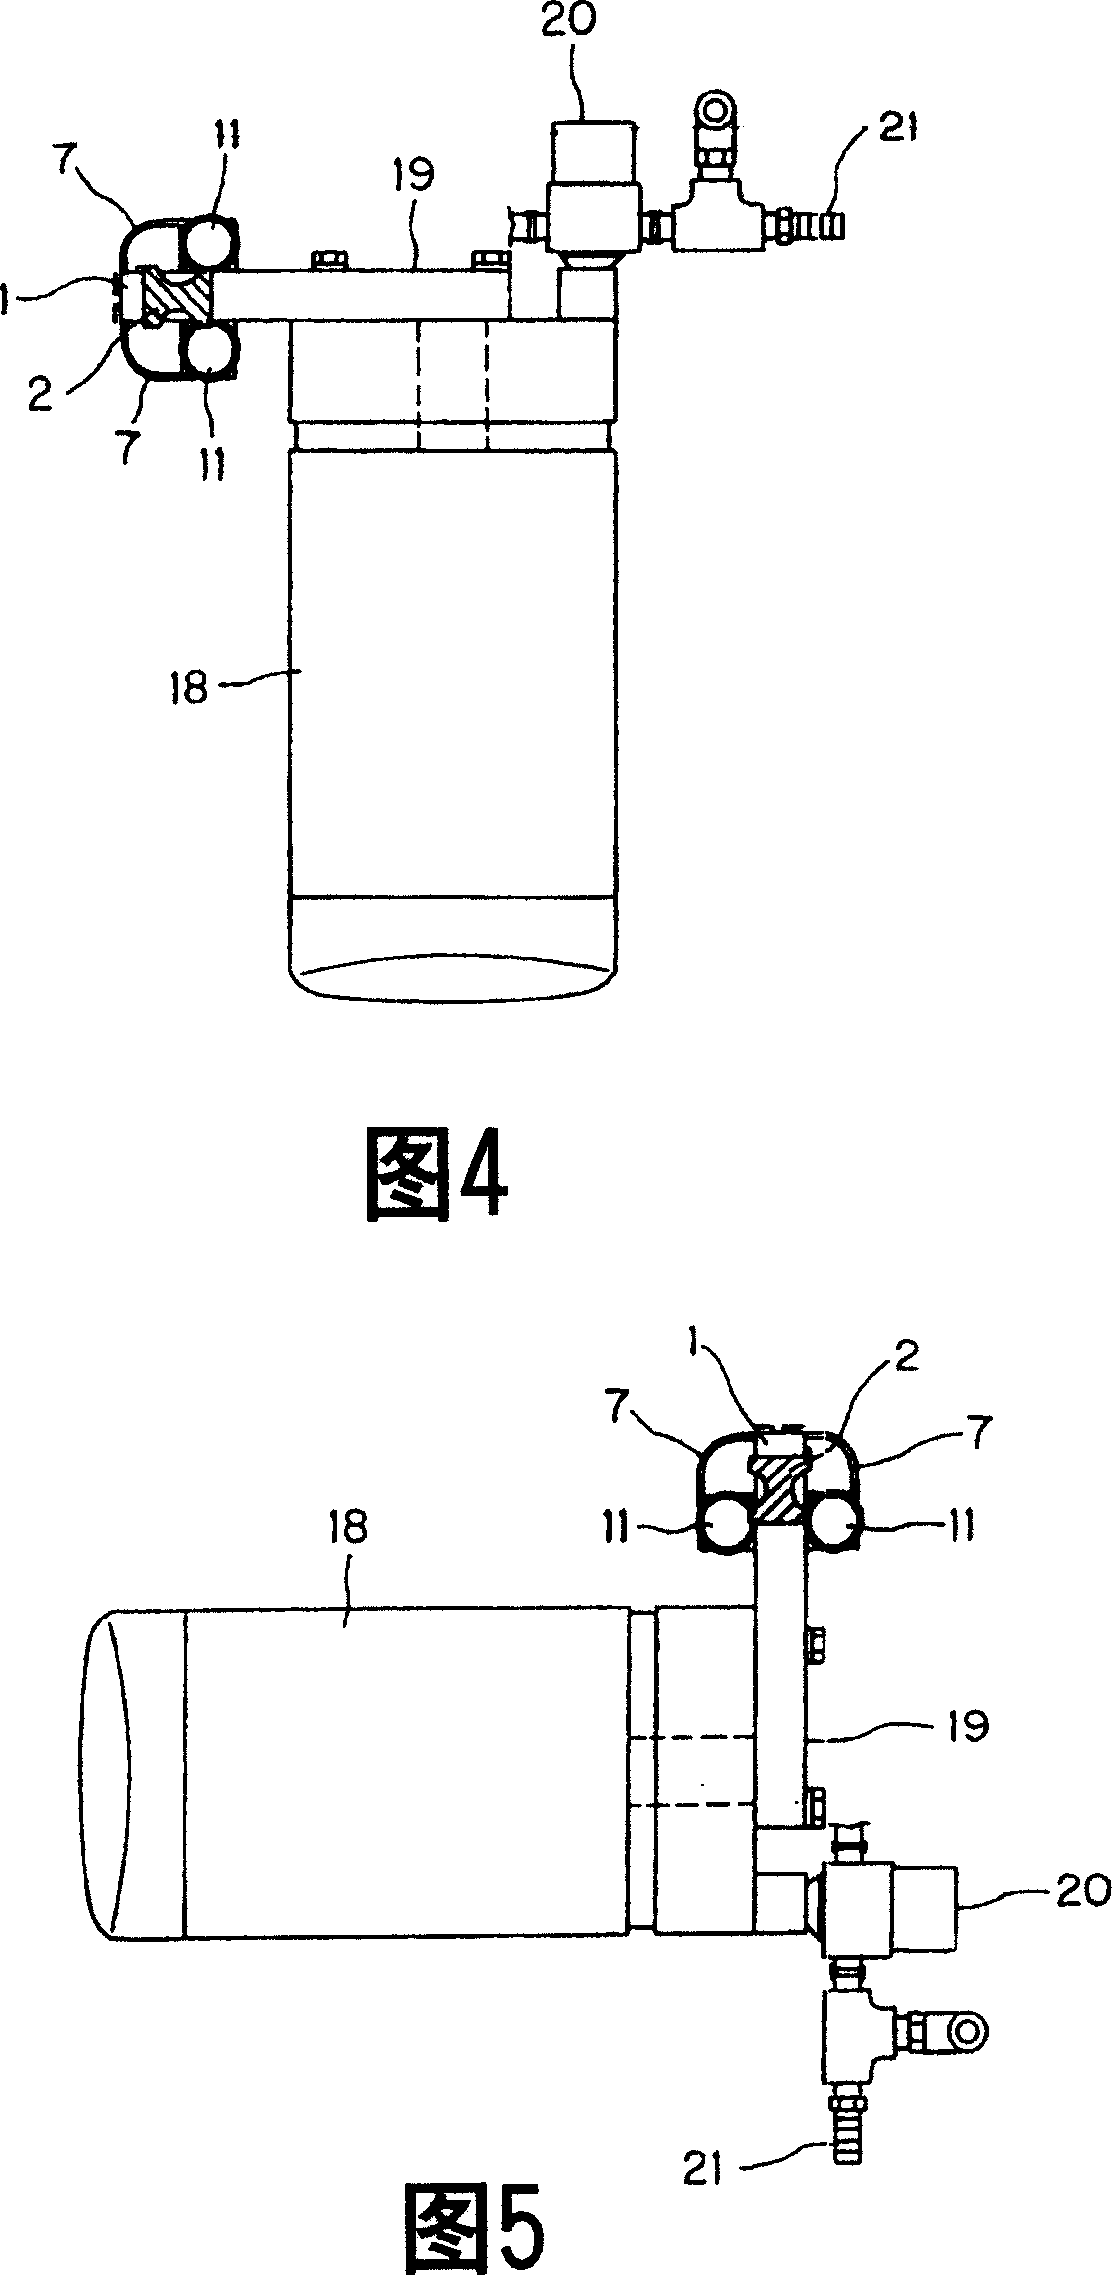 Cuttings recovering apparatus for electrode trimmer